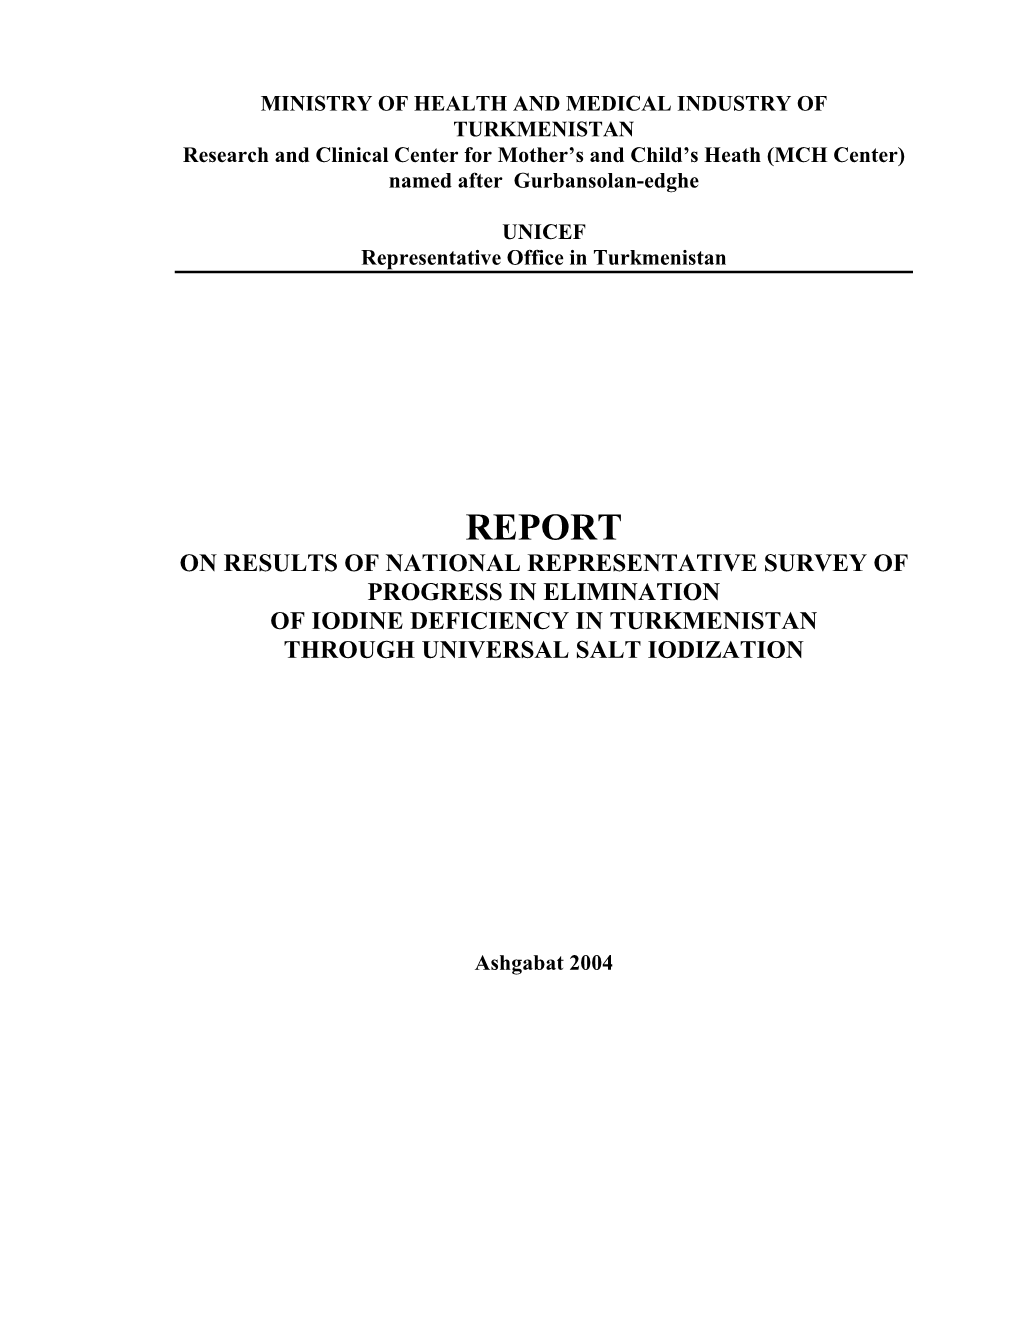 Report on Results of National Representative Survey of Progress in Elimination of Iodine Deficiency in Turkmenistan Through Universal Salt Iodization